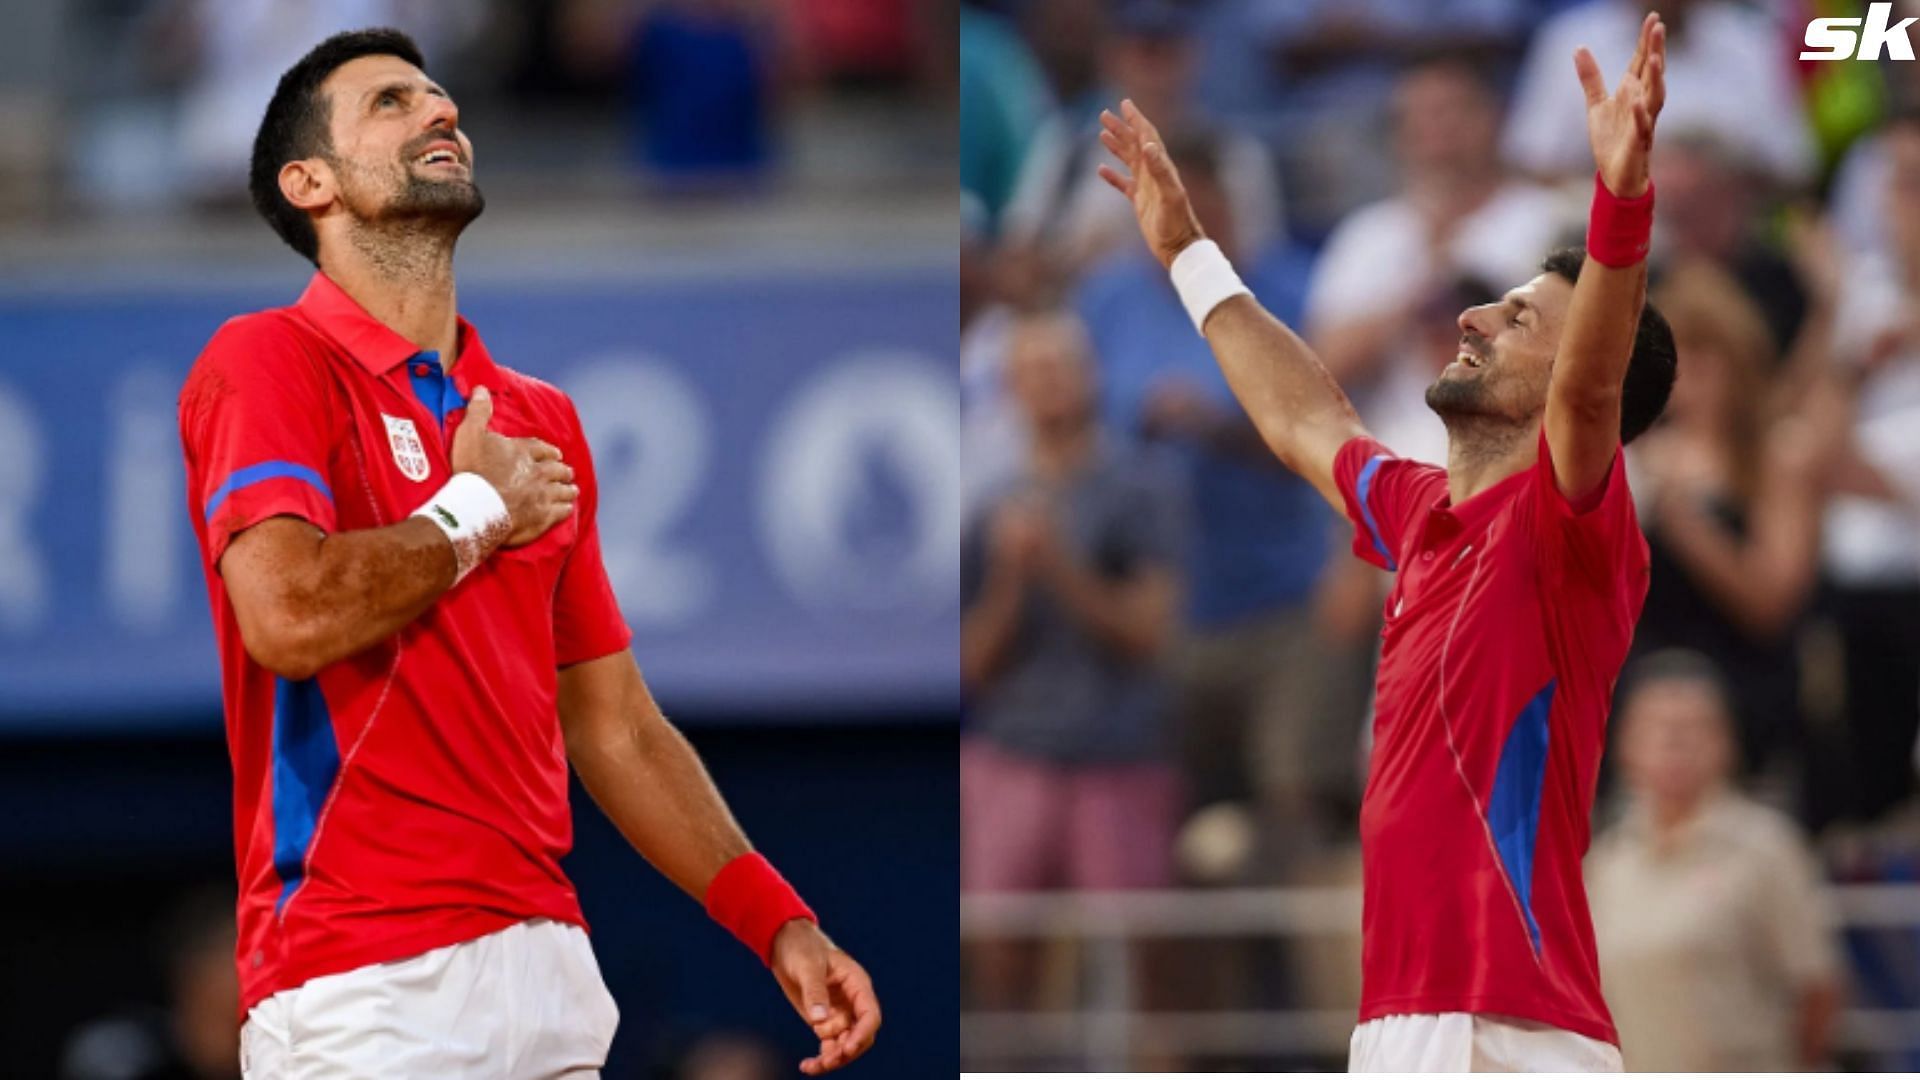 WATCH: Novak Djokovic displaying his Christian faith by kissing cross necklace at Paris Olympics goes viral as Serb reaches maiden final at event